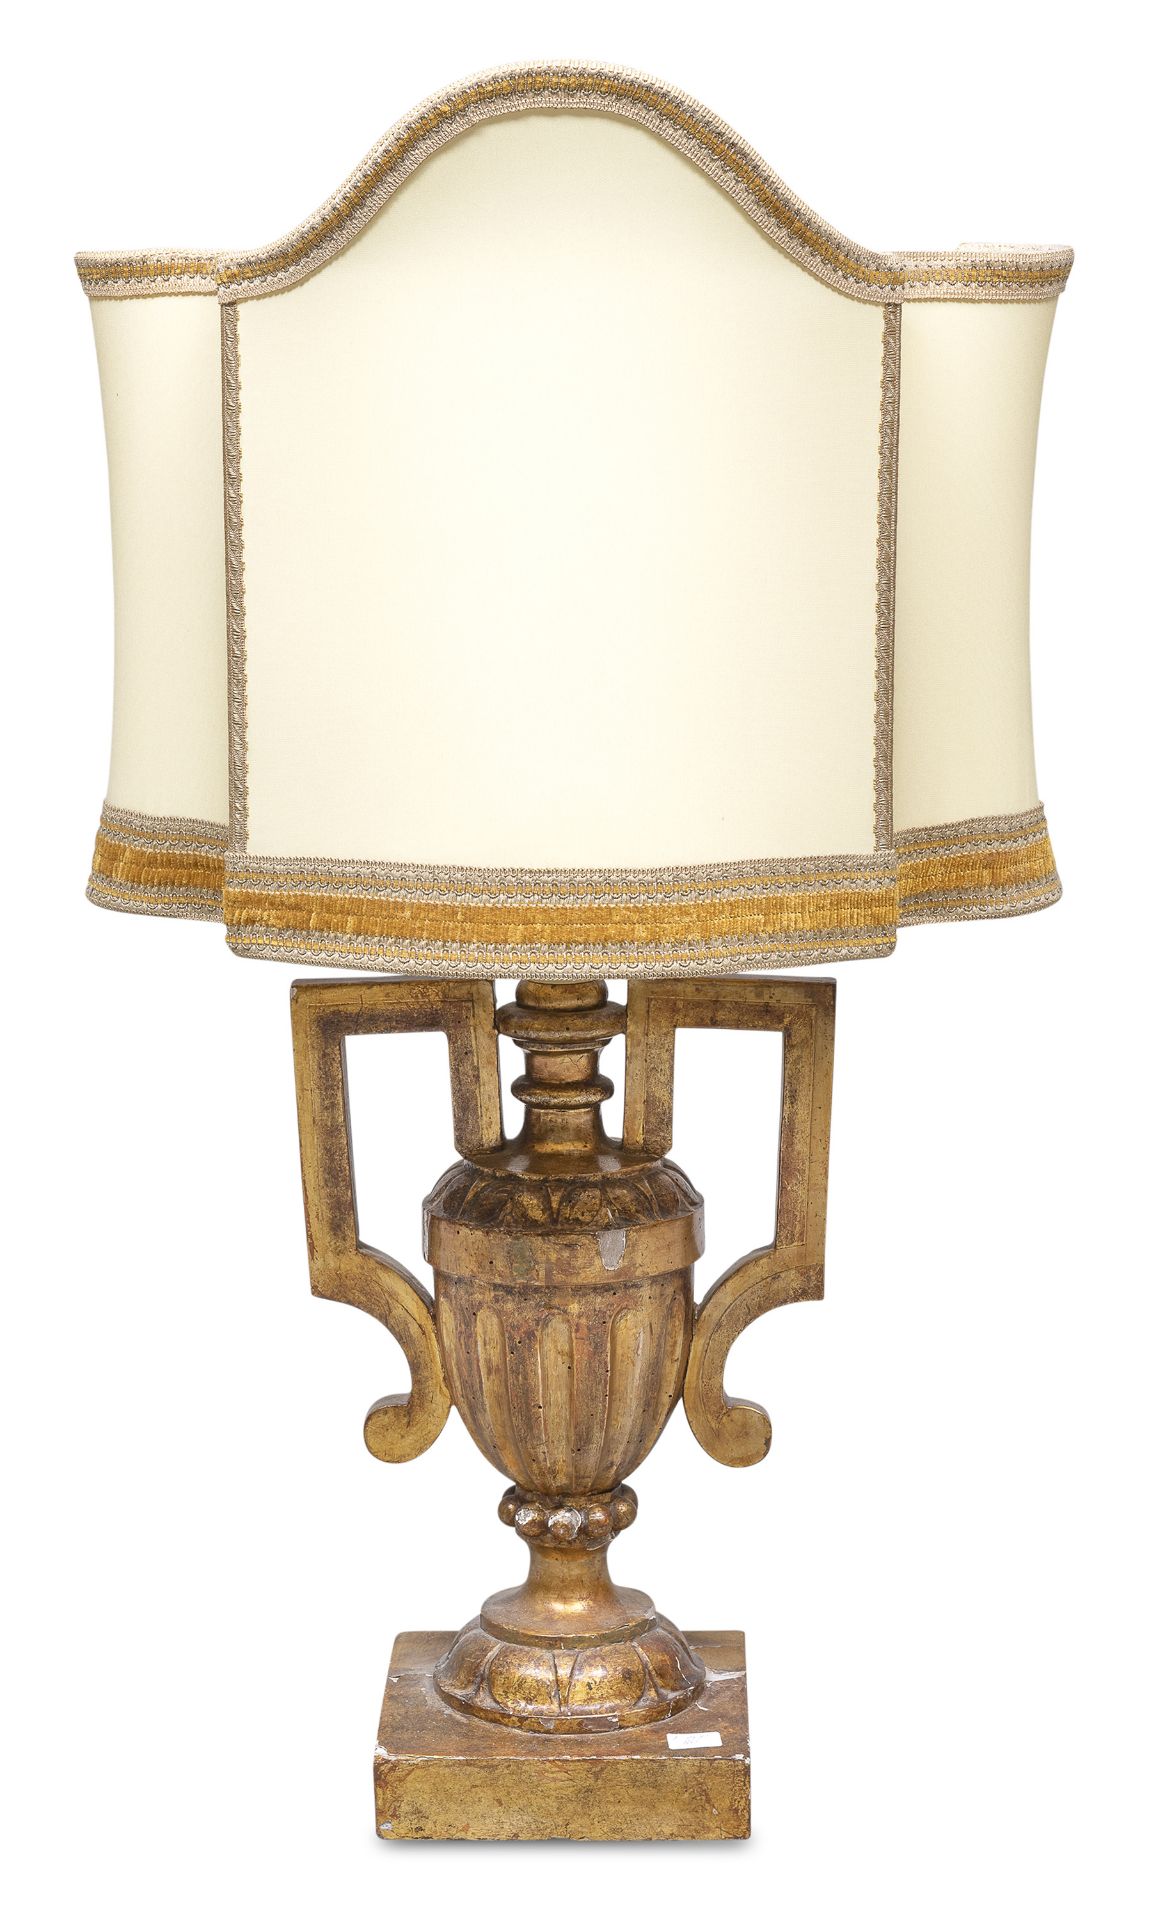 GILTWOOD PORTAPALME ADAPTED TO LAMP 18TH CENTURY